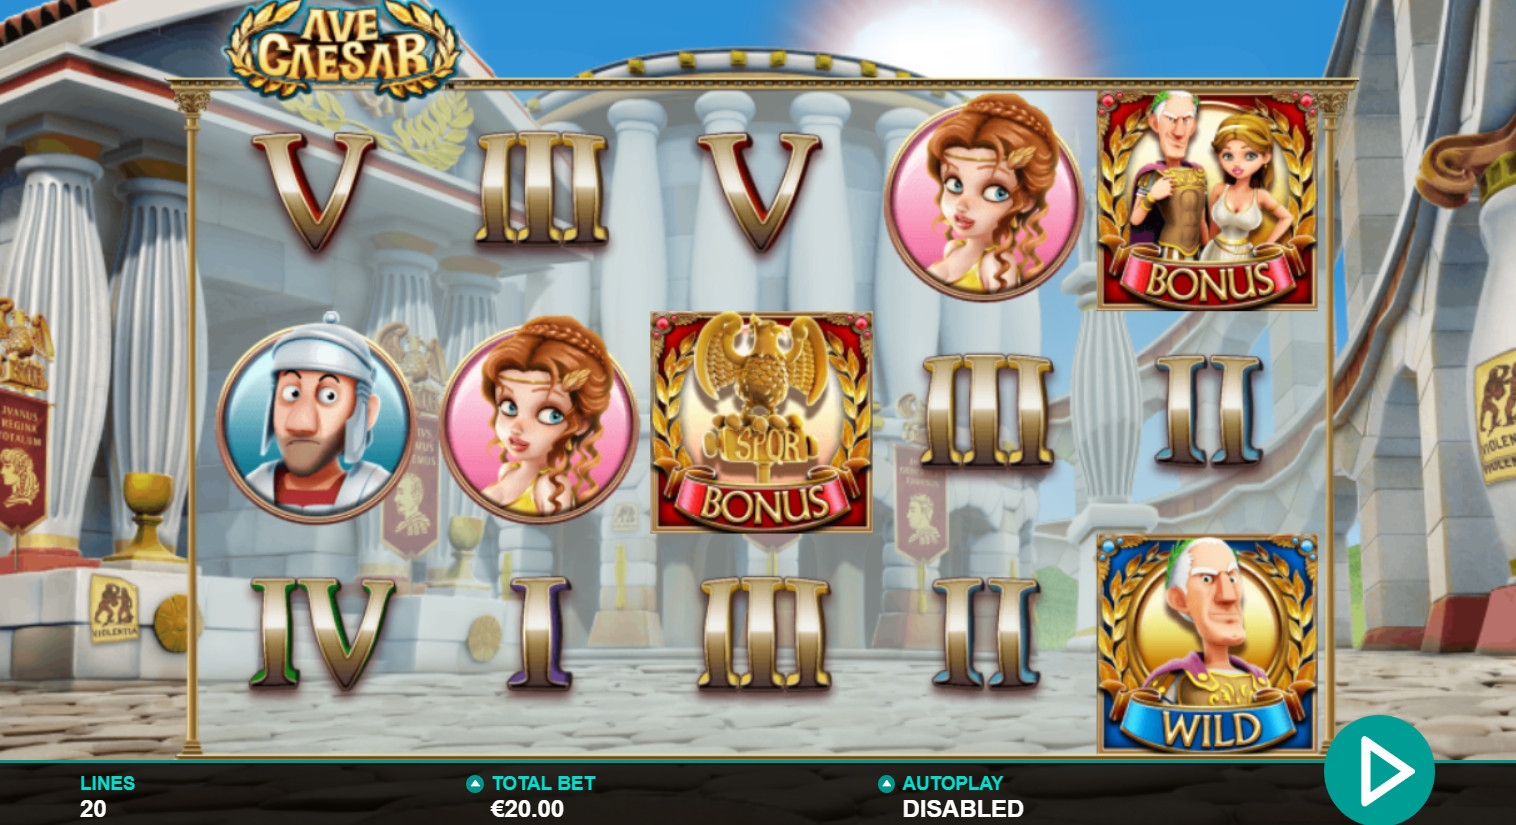 Ave Caesar (Ave Caesar) from category Slots